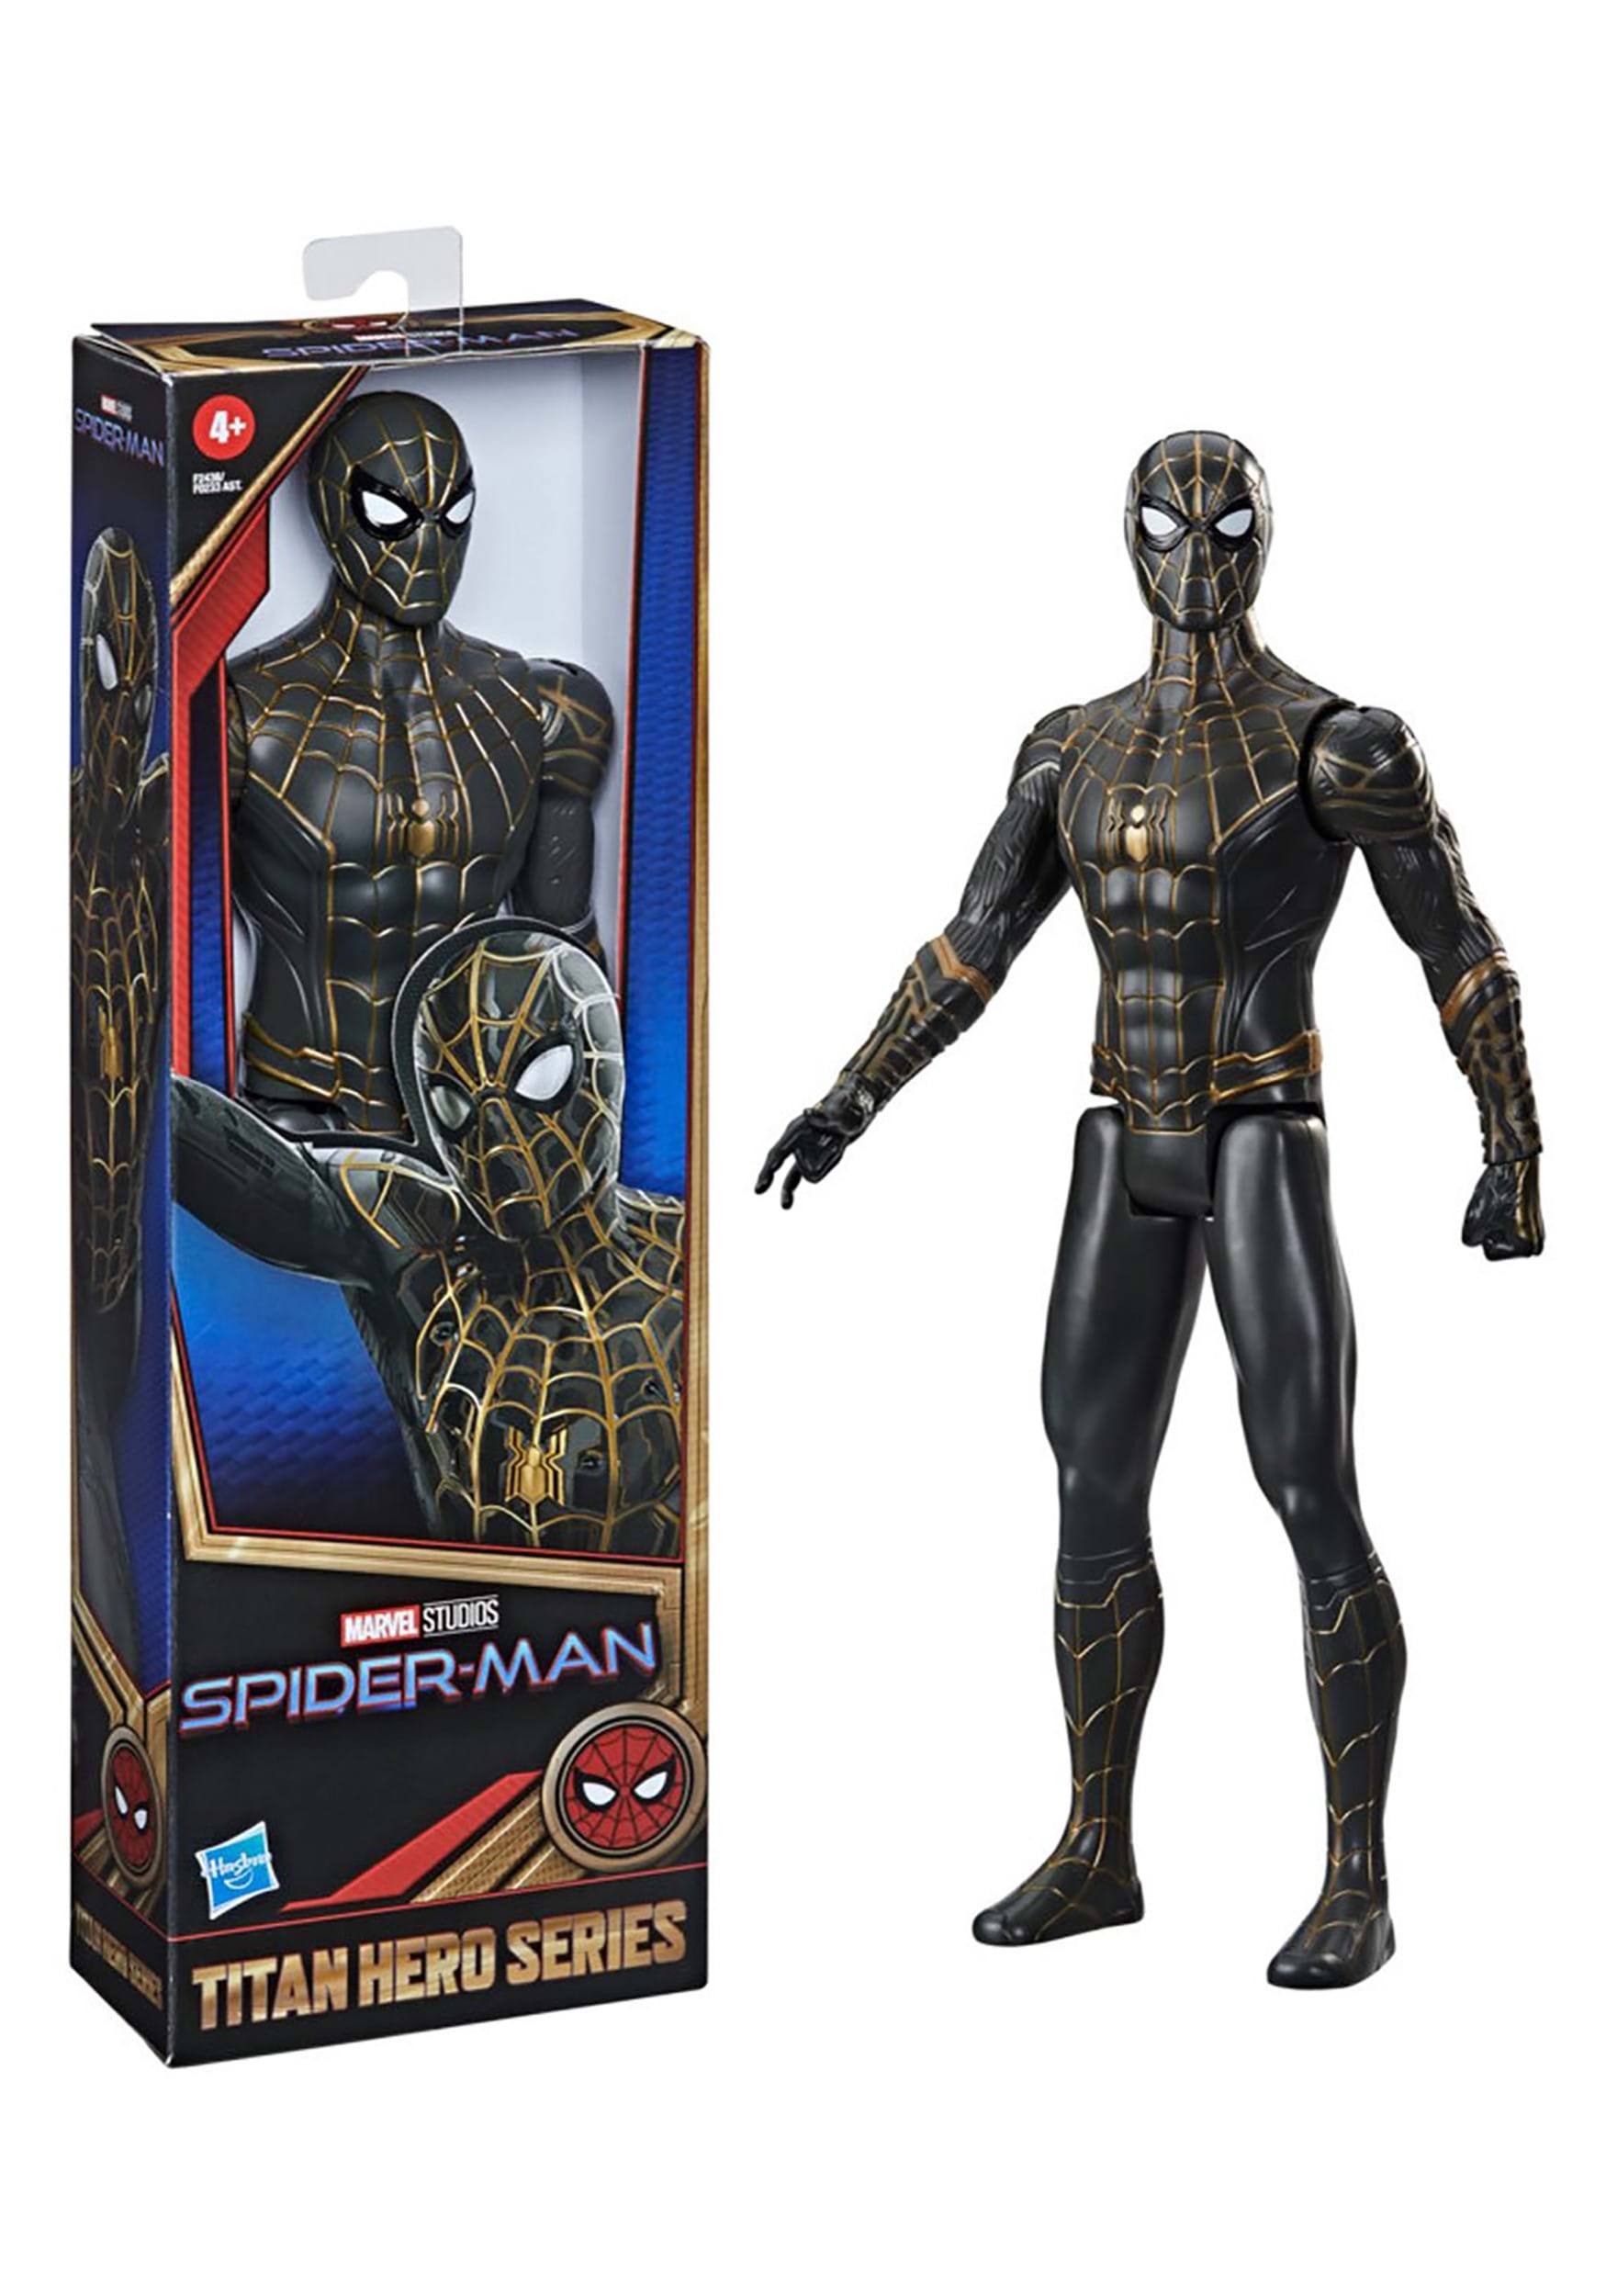 12 Inch Spider-Man Titan Hero Series Black and Gold Suit Figure